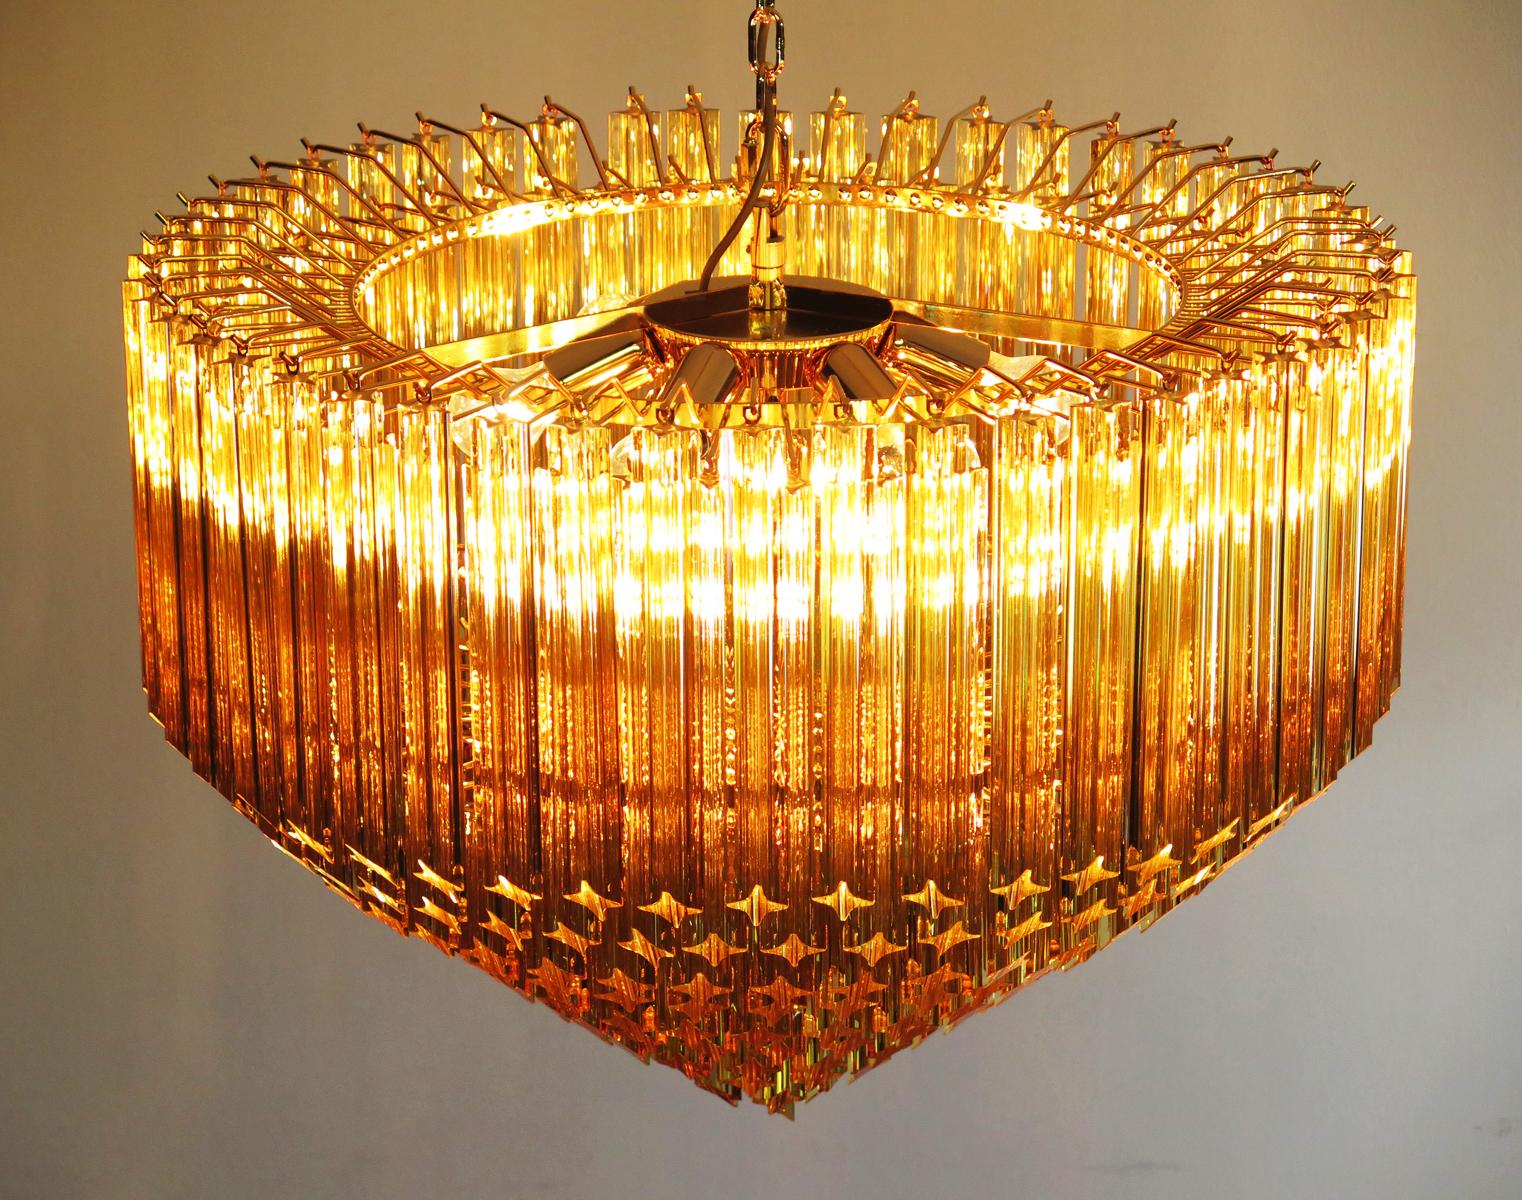 Pair of Quadriedri Murano Glass Chandelier, 265 Amber Prism, Gold Frame For Sale 8